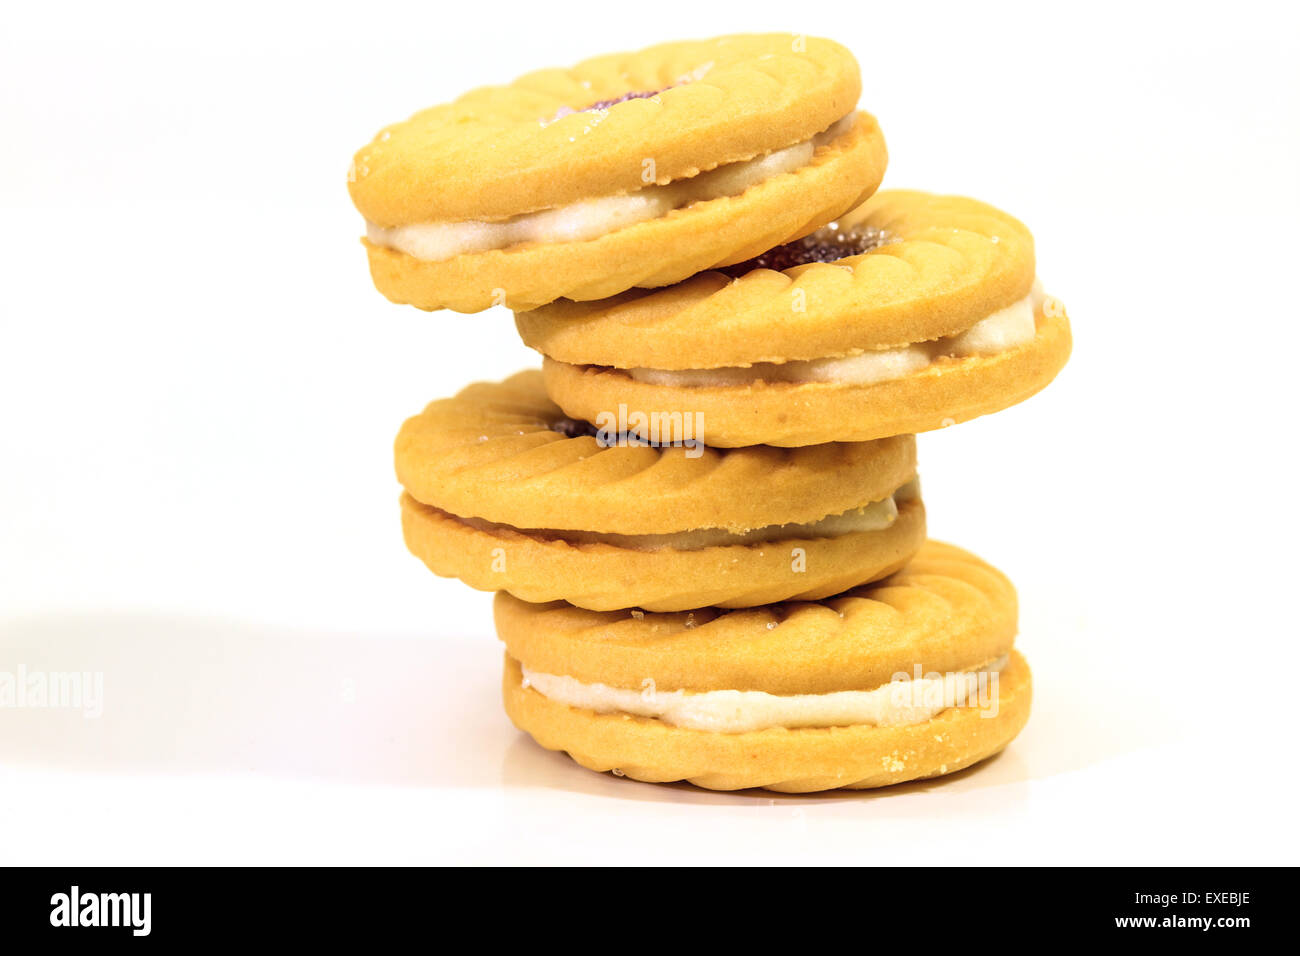 Sandwich biscuits with cream on white background Stock Photo